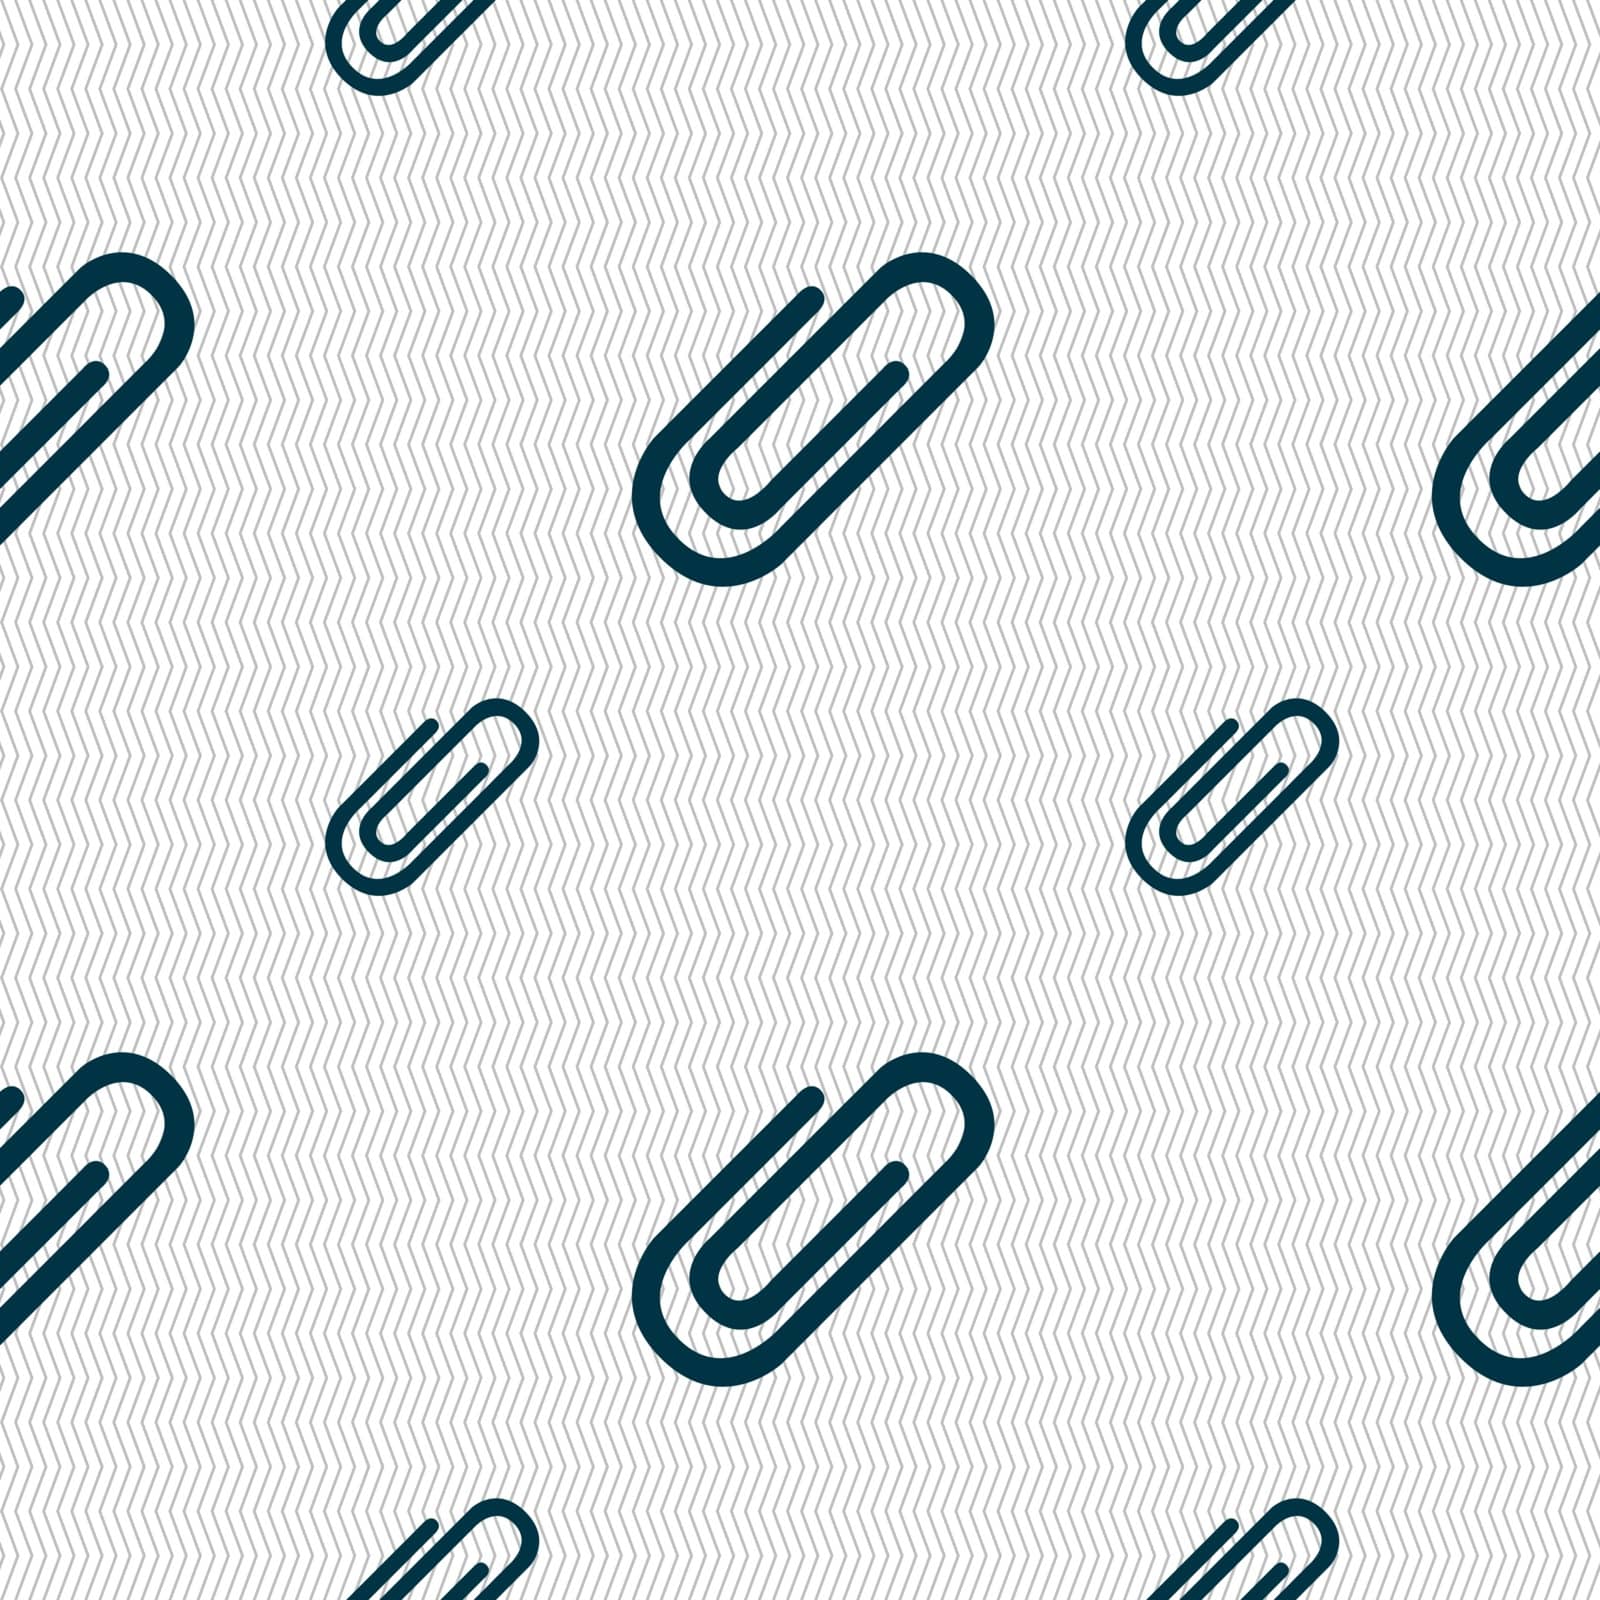 Paper clip sign icon. Clip symbol. Seamless pattern with geometric texture. Vector illustration